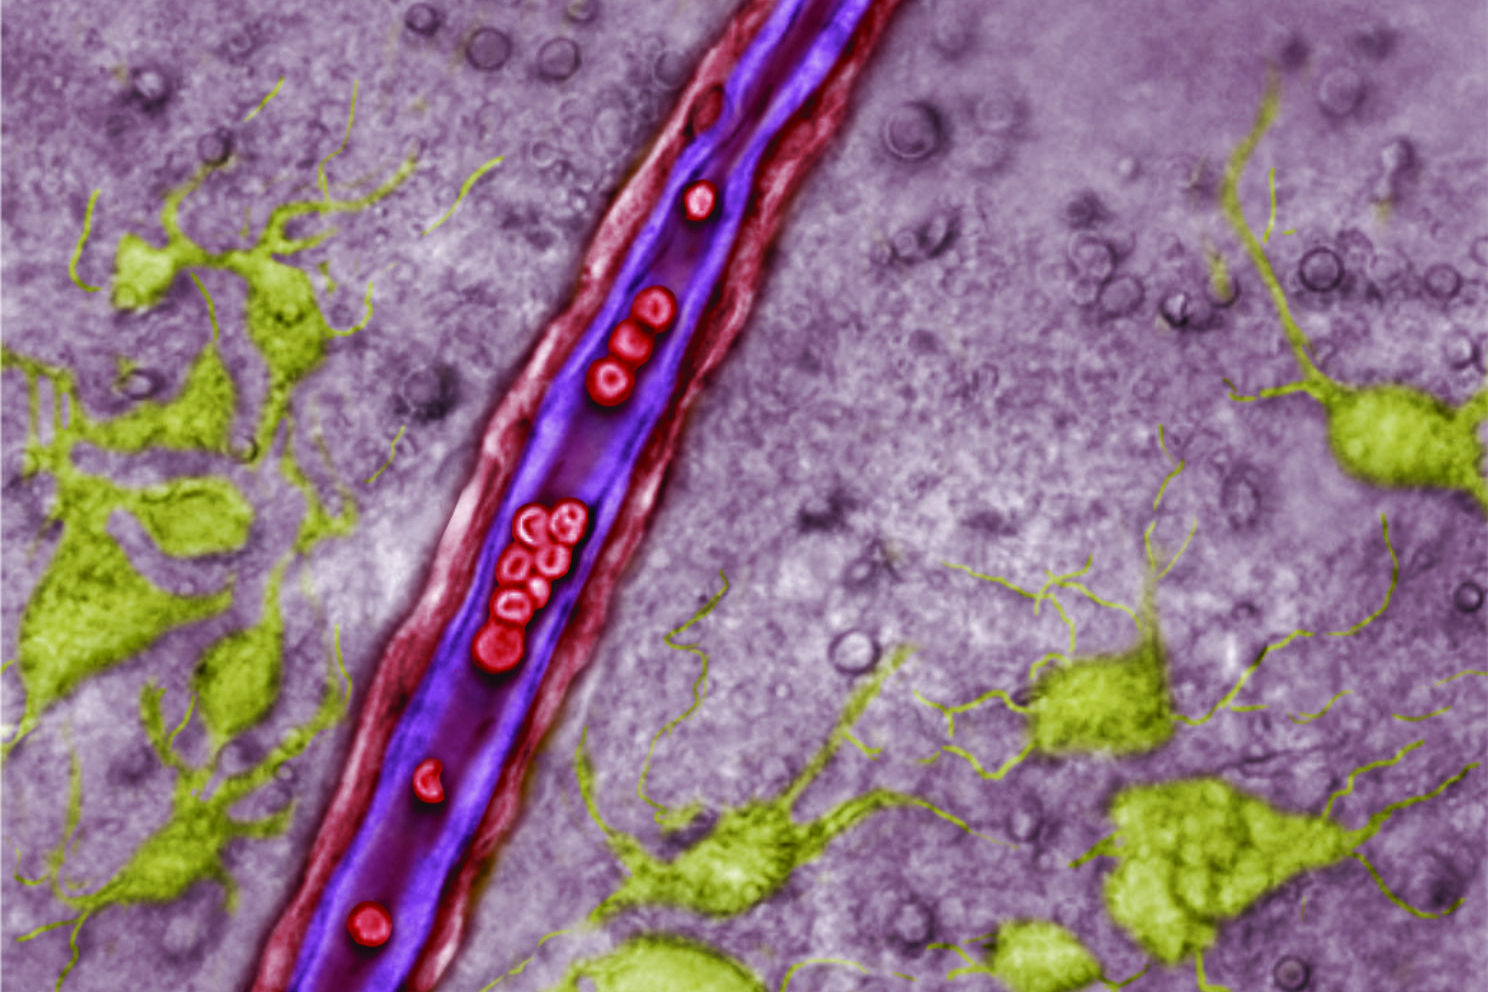 A blood vessel in the retrotrapezoid nucleus (RTN). Endothelial cells lining the vessel are purple, red blood cells are red, and neurons are green. Astrocytes are not identified in this image, but would be among the greyed background cells. (Dan Mulkey/UConn Image)